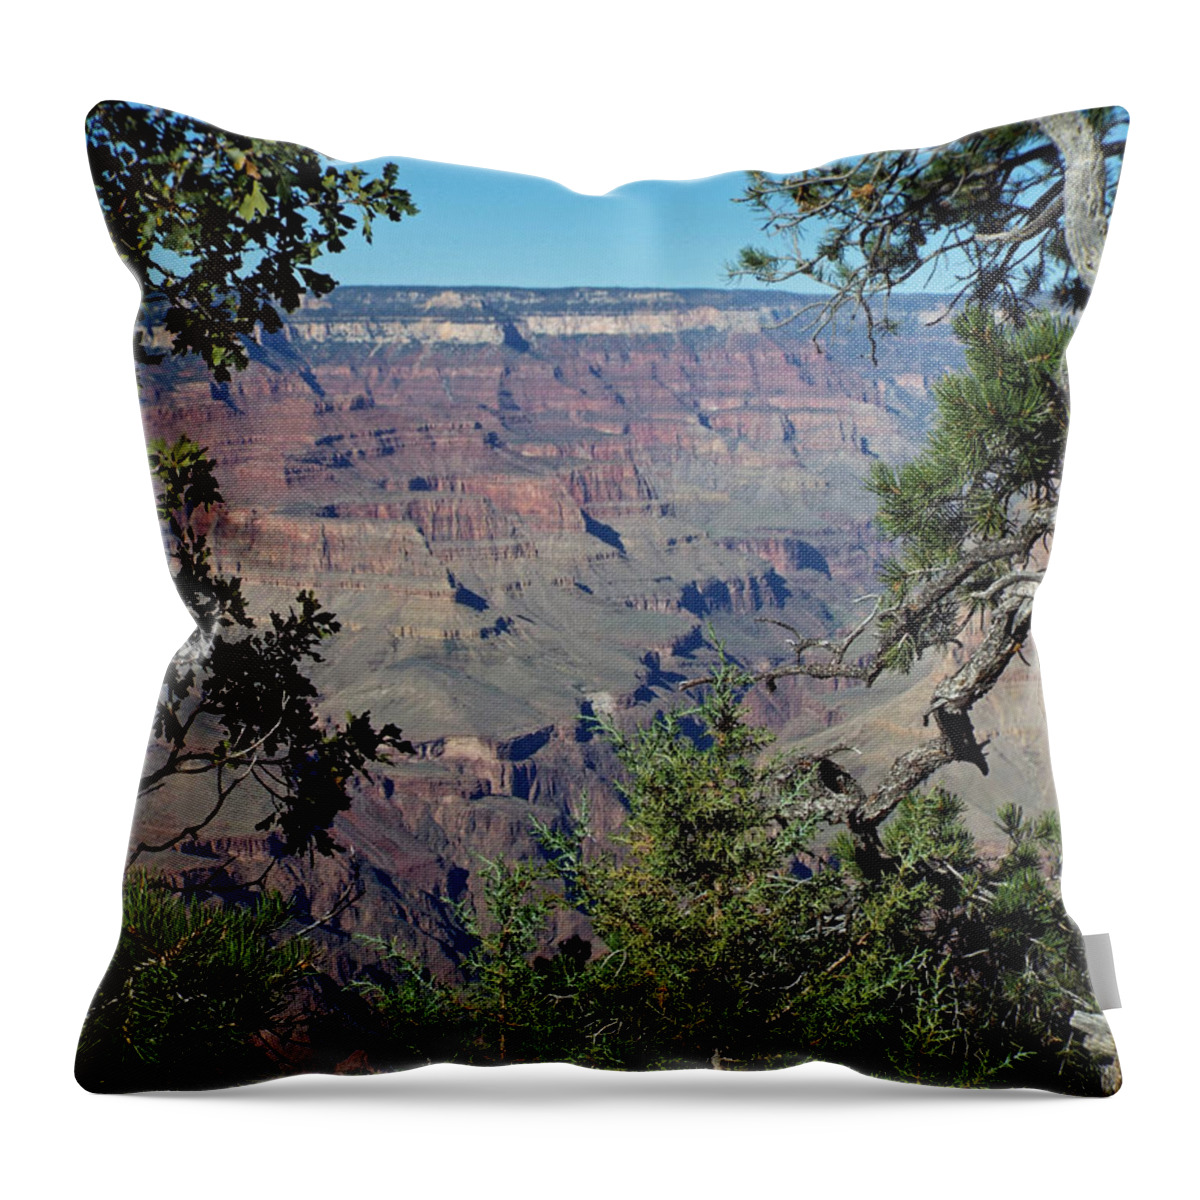  Throw Pillow featuring the digital art Grand Canyon 5 by Steve Breslow